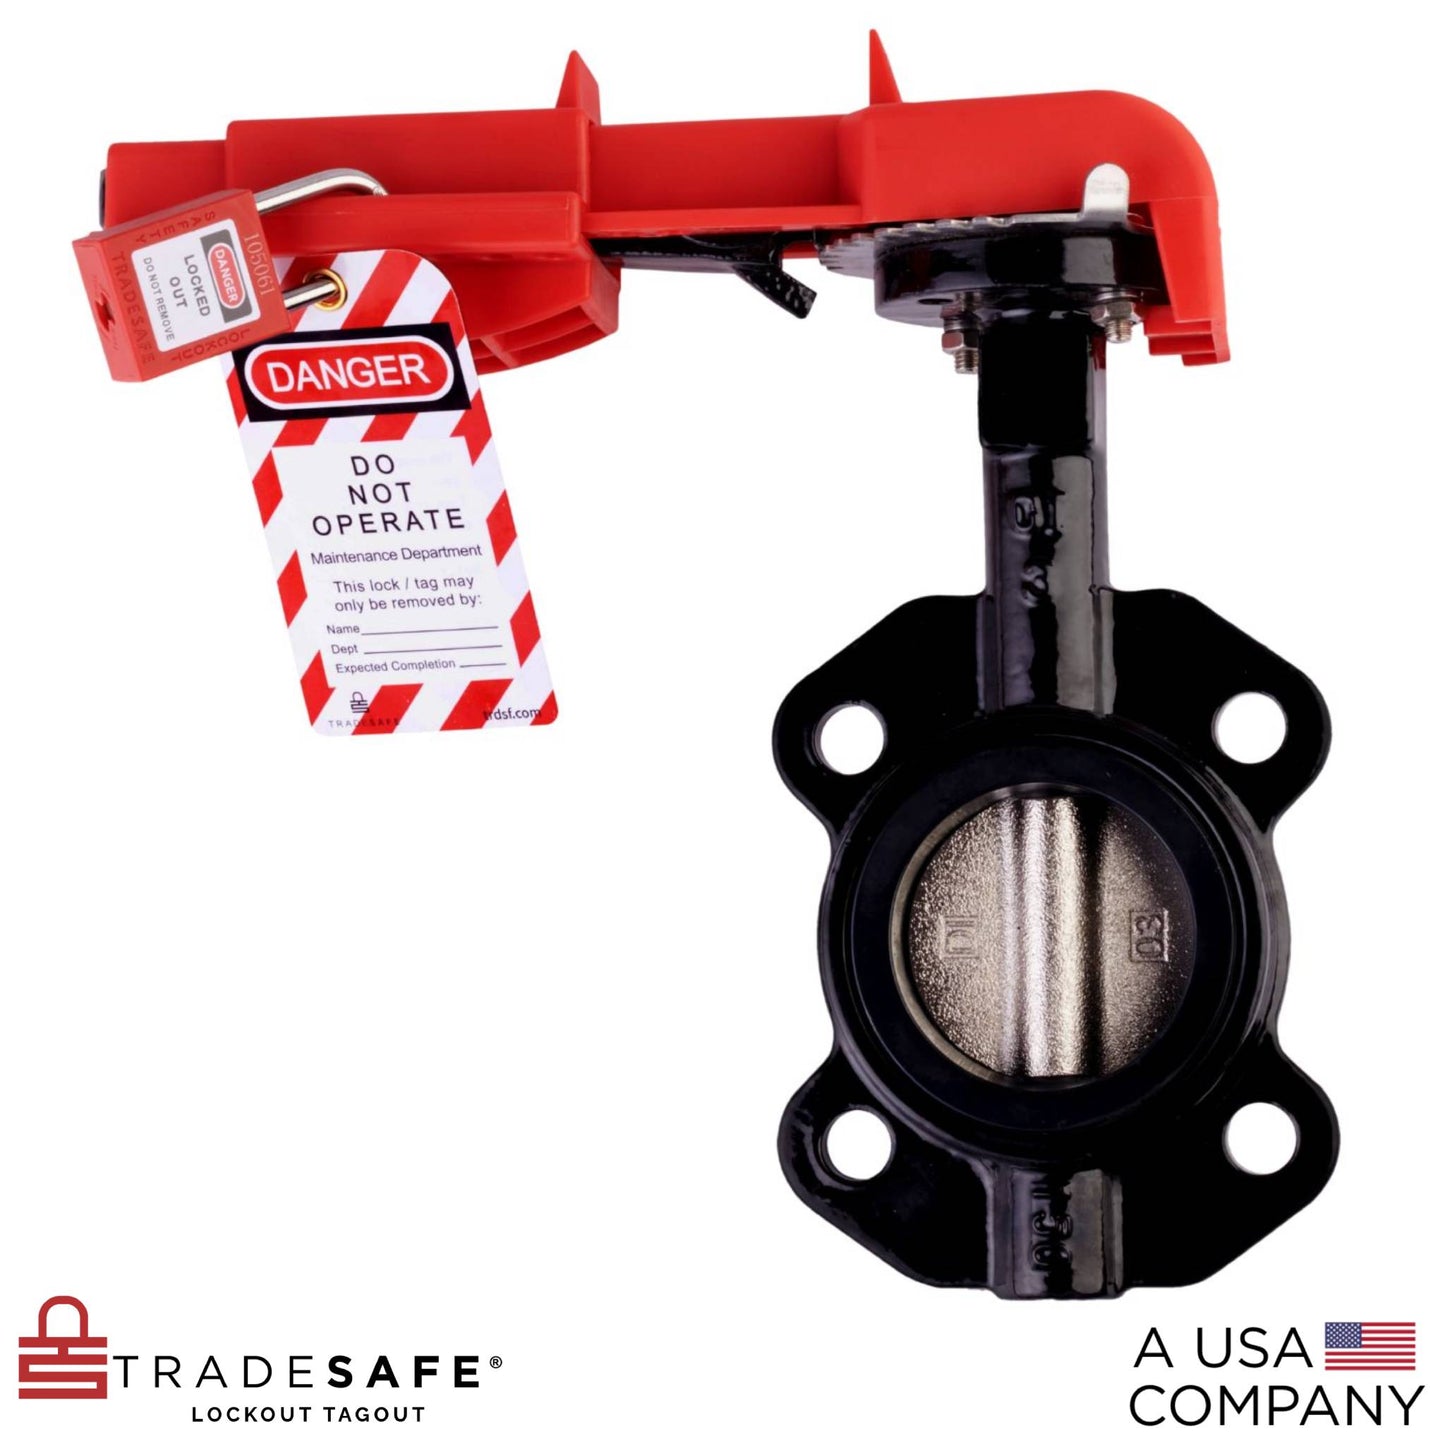 butterfly valve lockout device locking out valve handle with padlock and safety tag